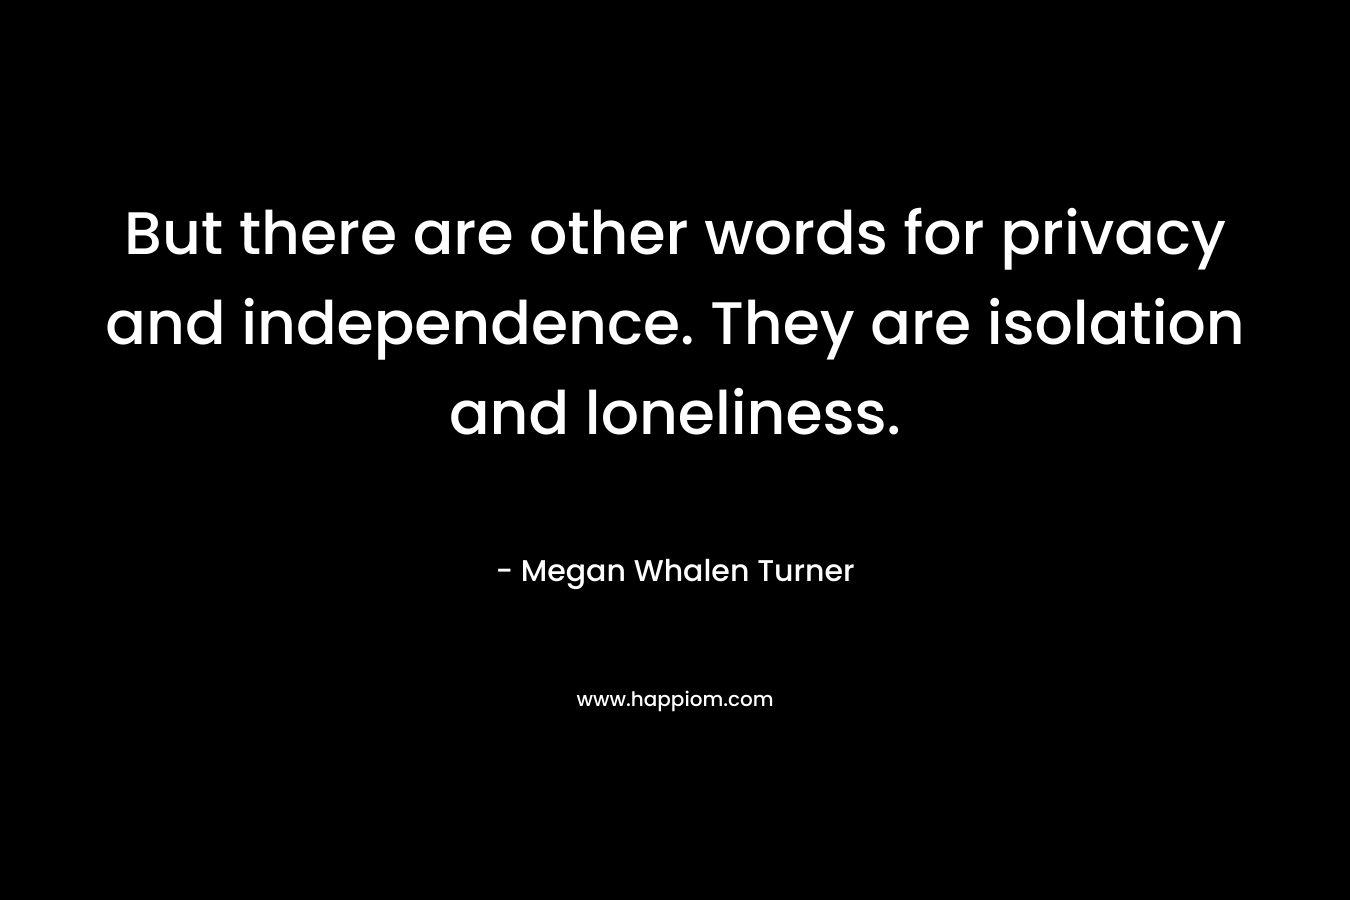 But there are other words for privacy and independence. They are isolation and loneliness. – Megan Whalen Turner